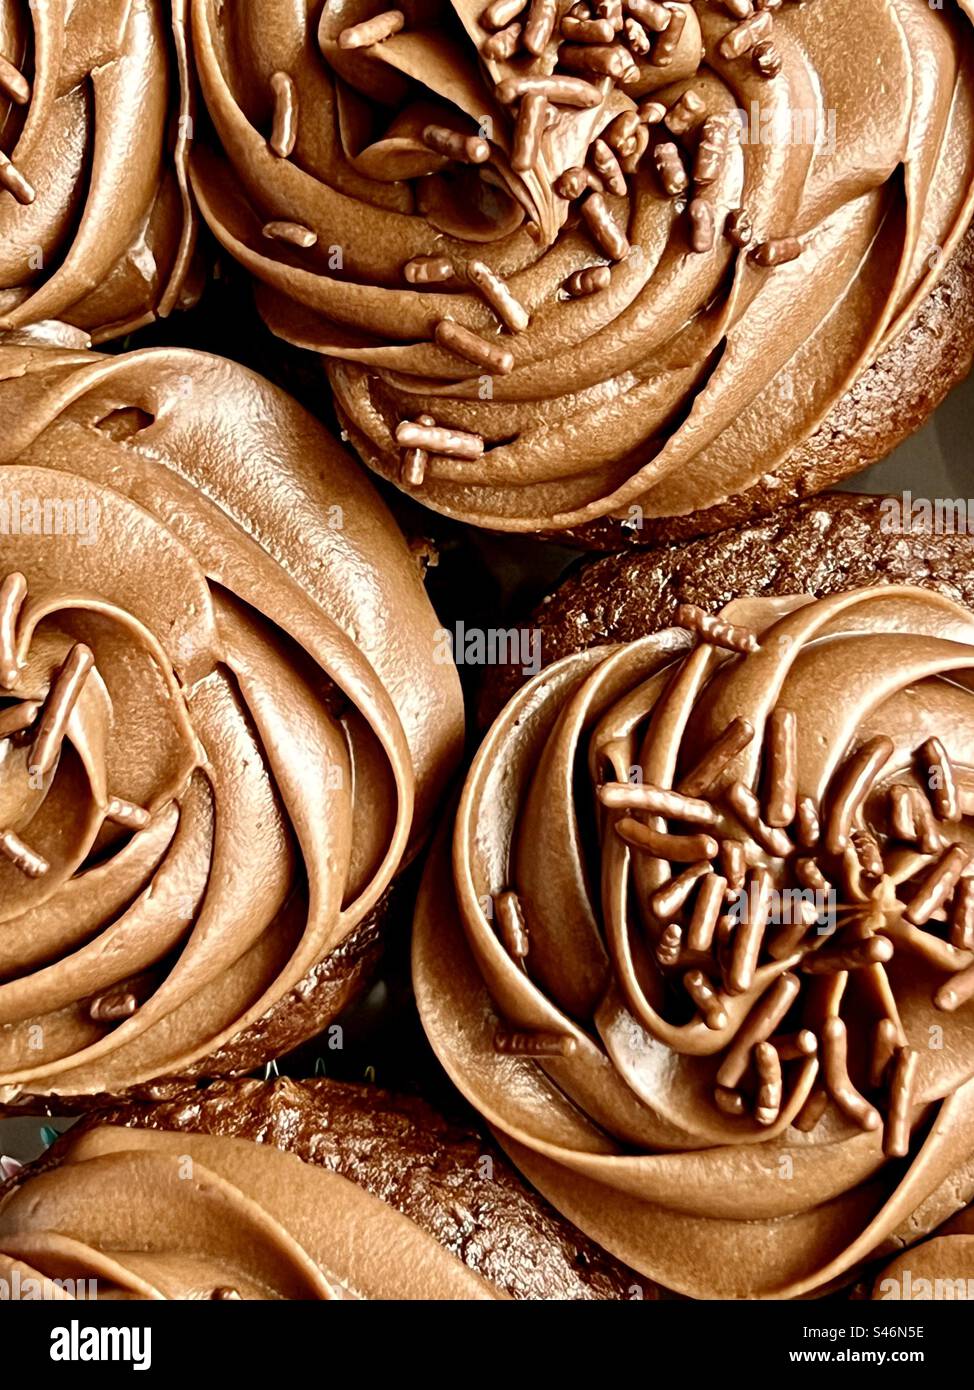 Chocolate cupcakes viewed from above Stock Photo